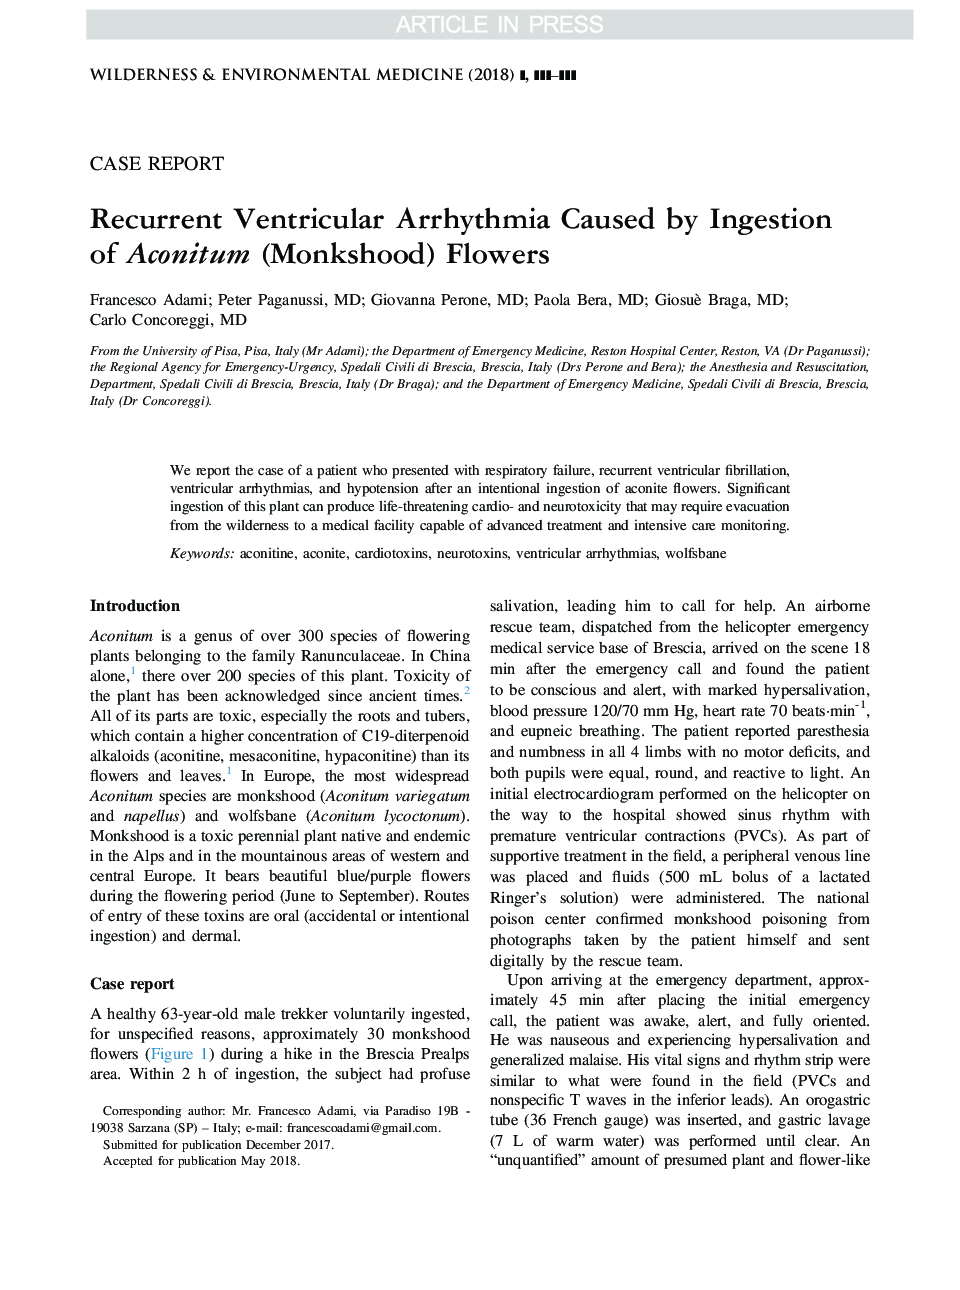 Recurrent Ventricular Arrhythmia Caused by Ingestion of Aconitum (Monkshood) Flowers